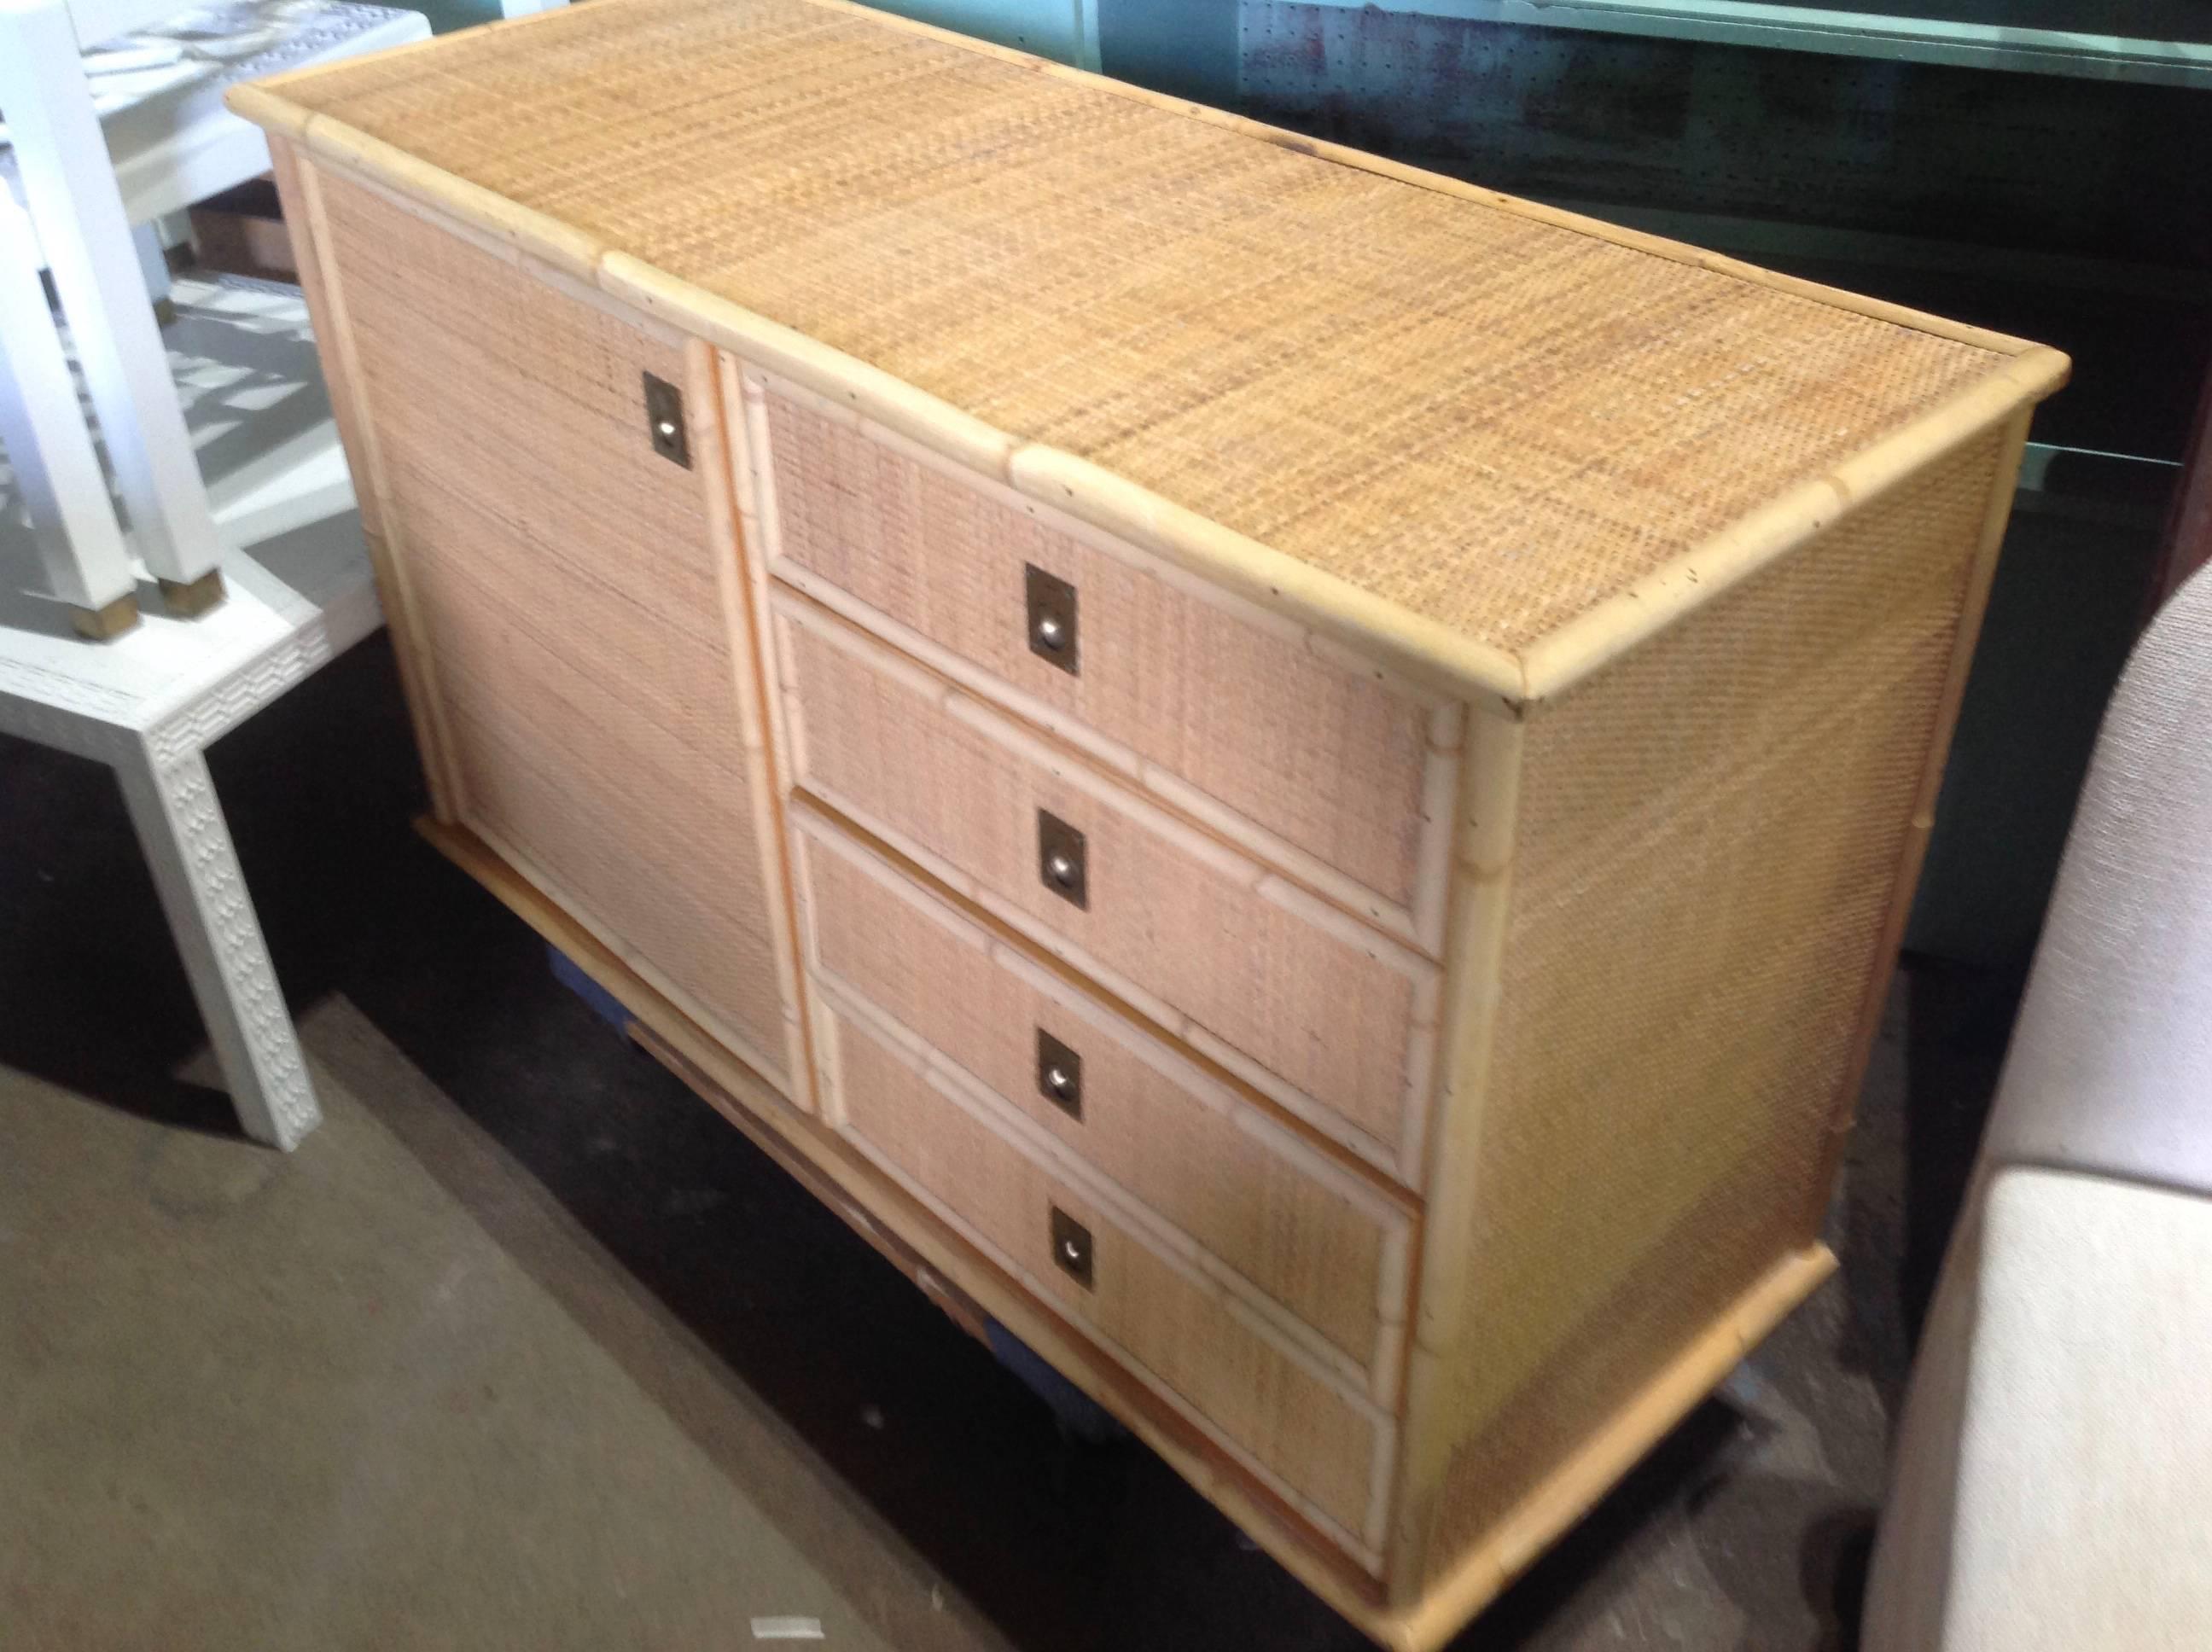 Superb Italian midcentury design. This is an elegantly designed sleek side cabinet 
perfect for use in any room.